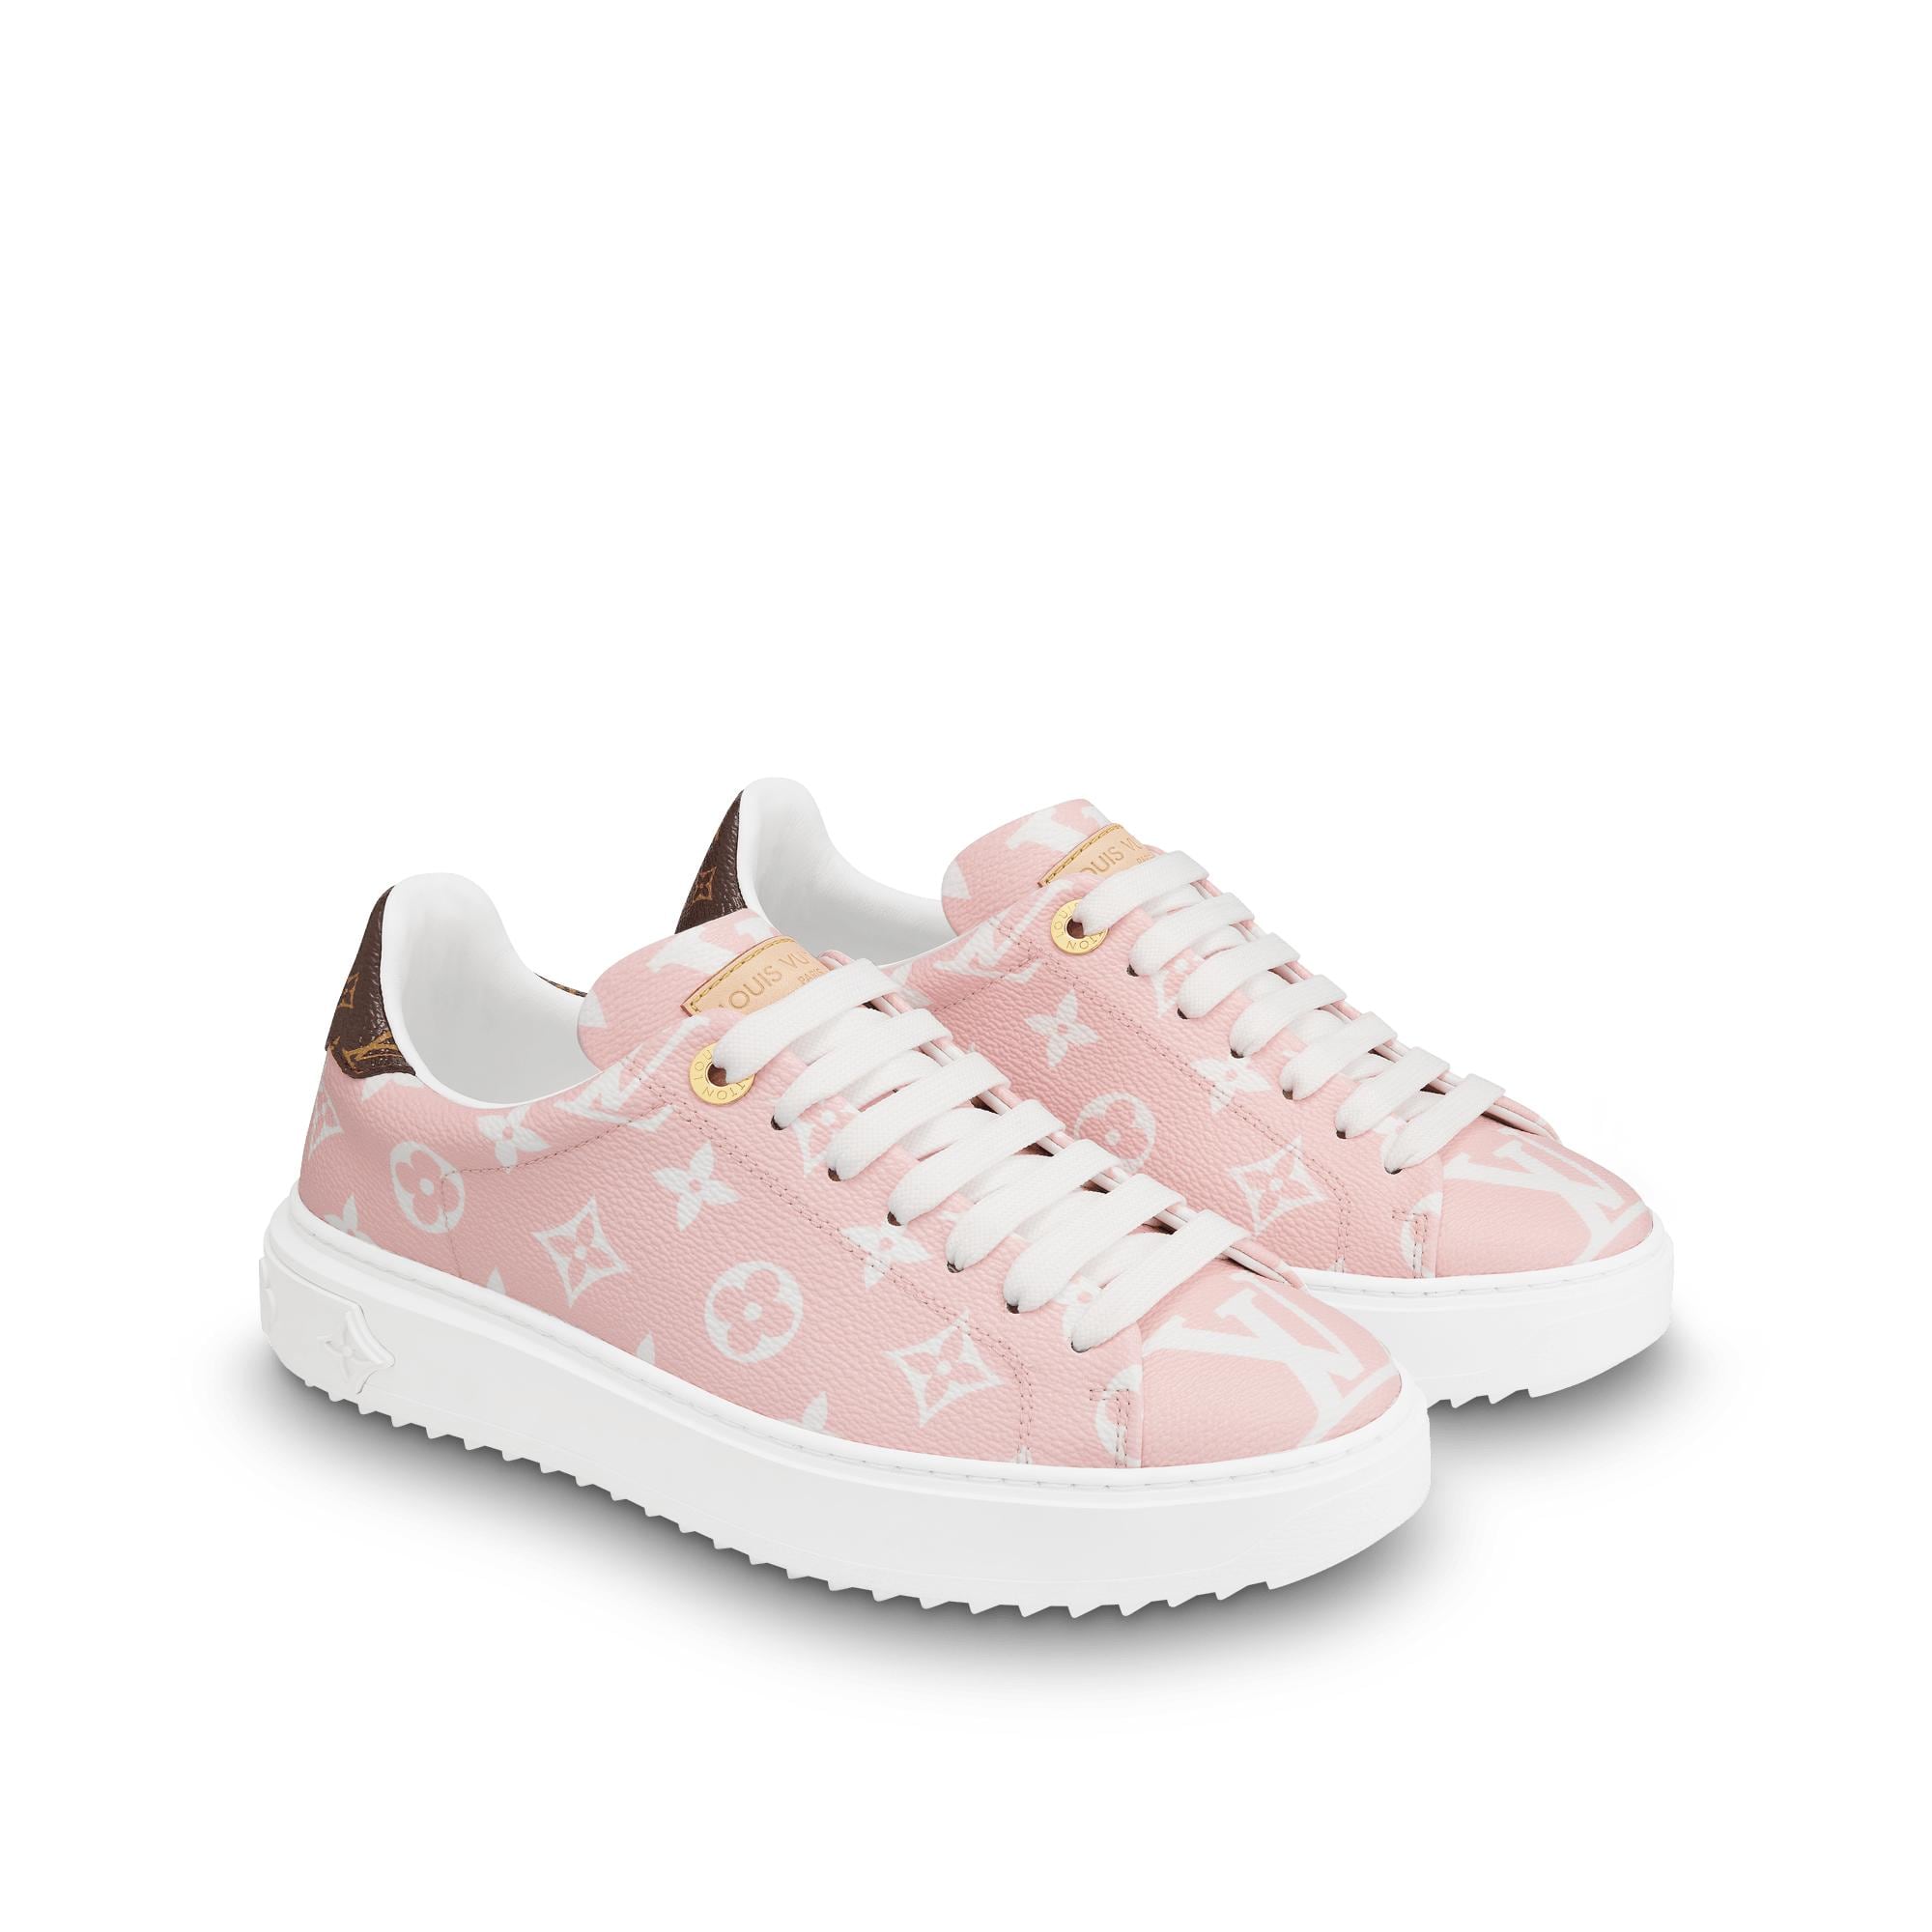 Louis Vuitton Time Out Sneaker Sneakers - Pink Sneakers, Shoes - LOU539873